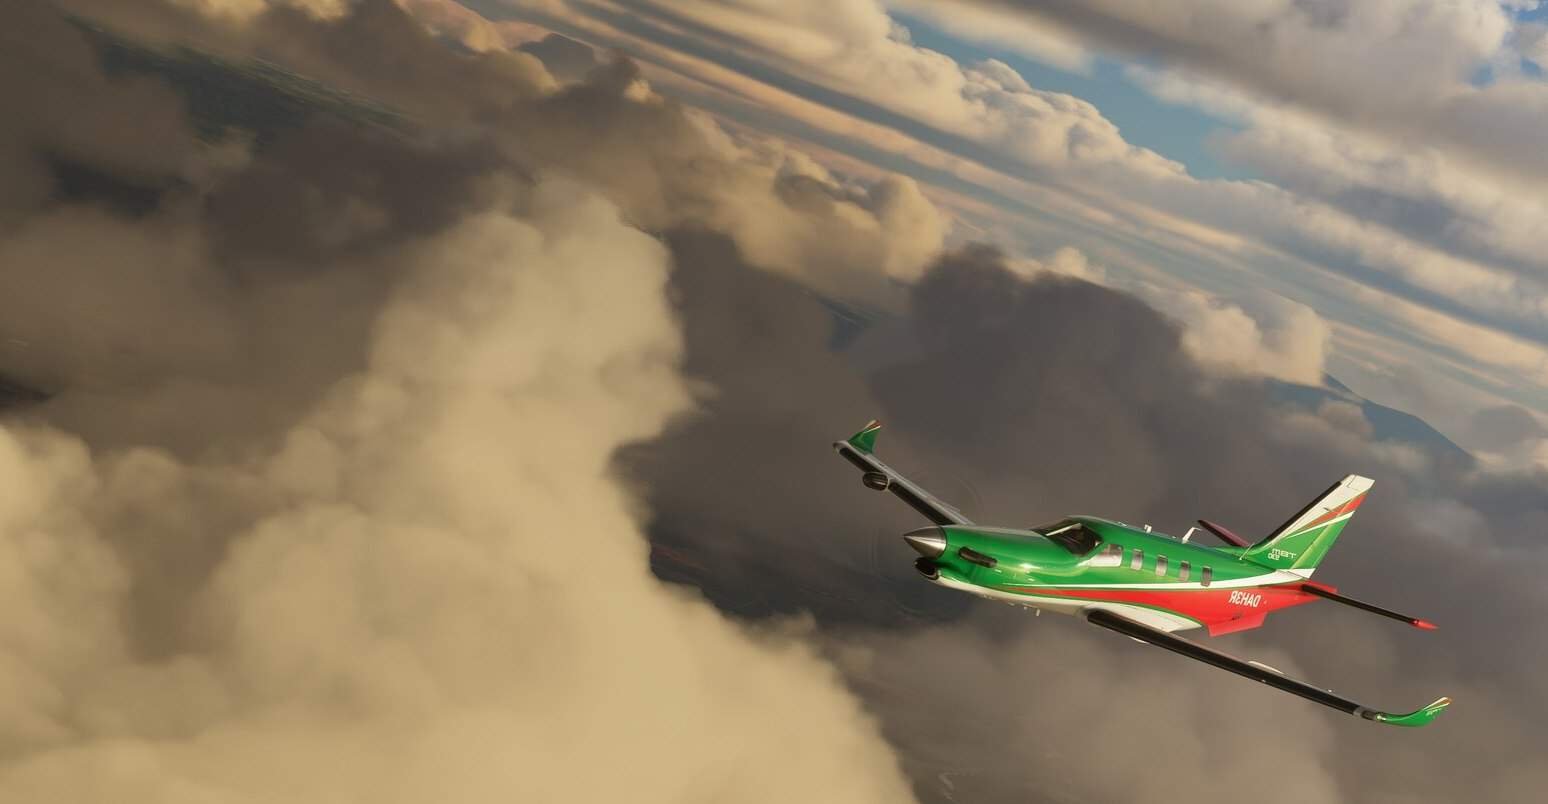 Microsoft Flight Simulator List Of Unique Airports And Scenery Glitches - new plane tycoon build fly and explore roblox